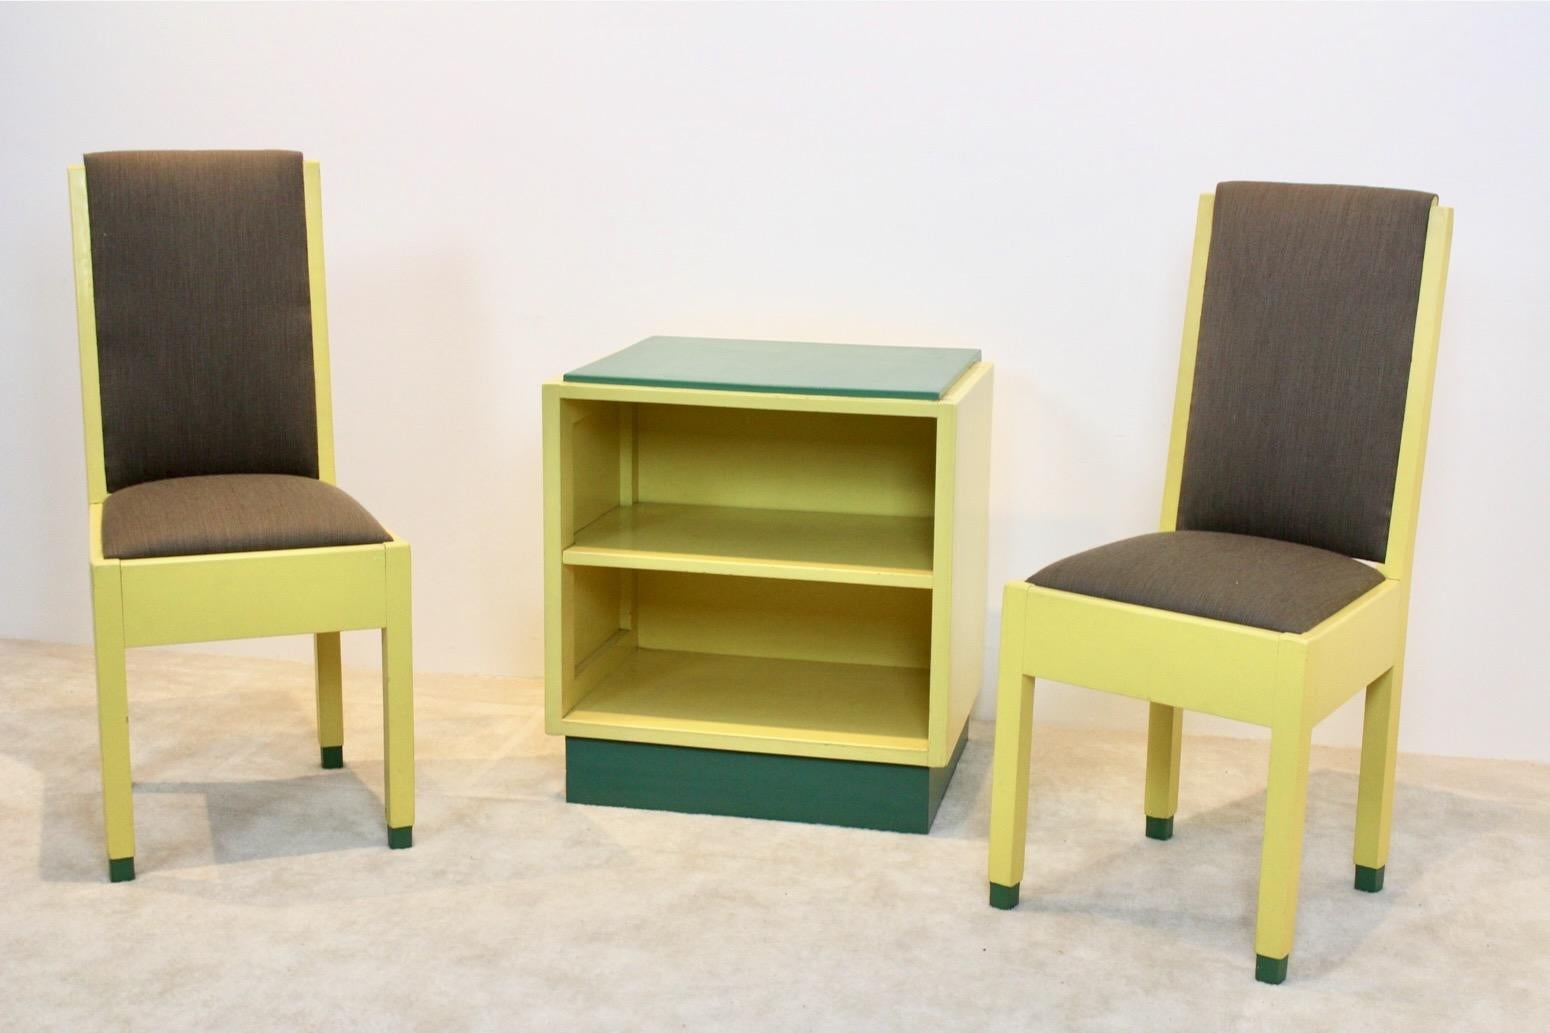 20th Century Dutch Modernism High Back Chairs and Cabinet by Jan den Drijver for ‘De Stijl’ For Sale